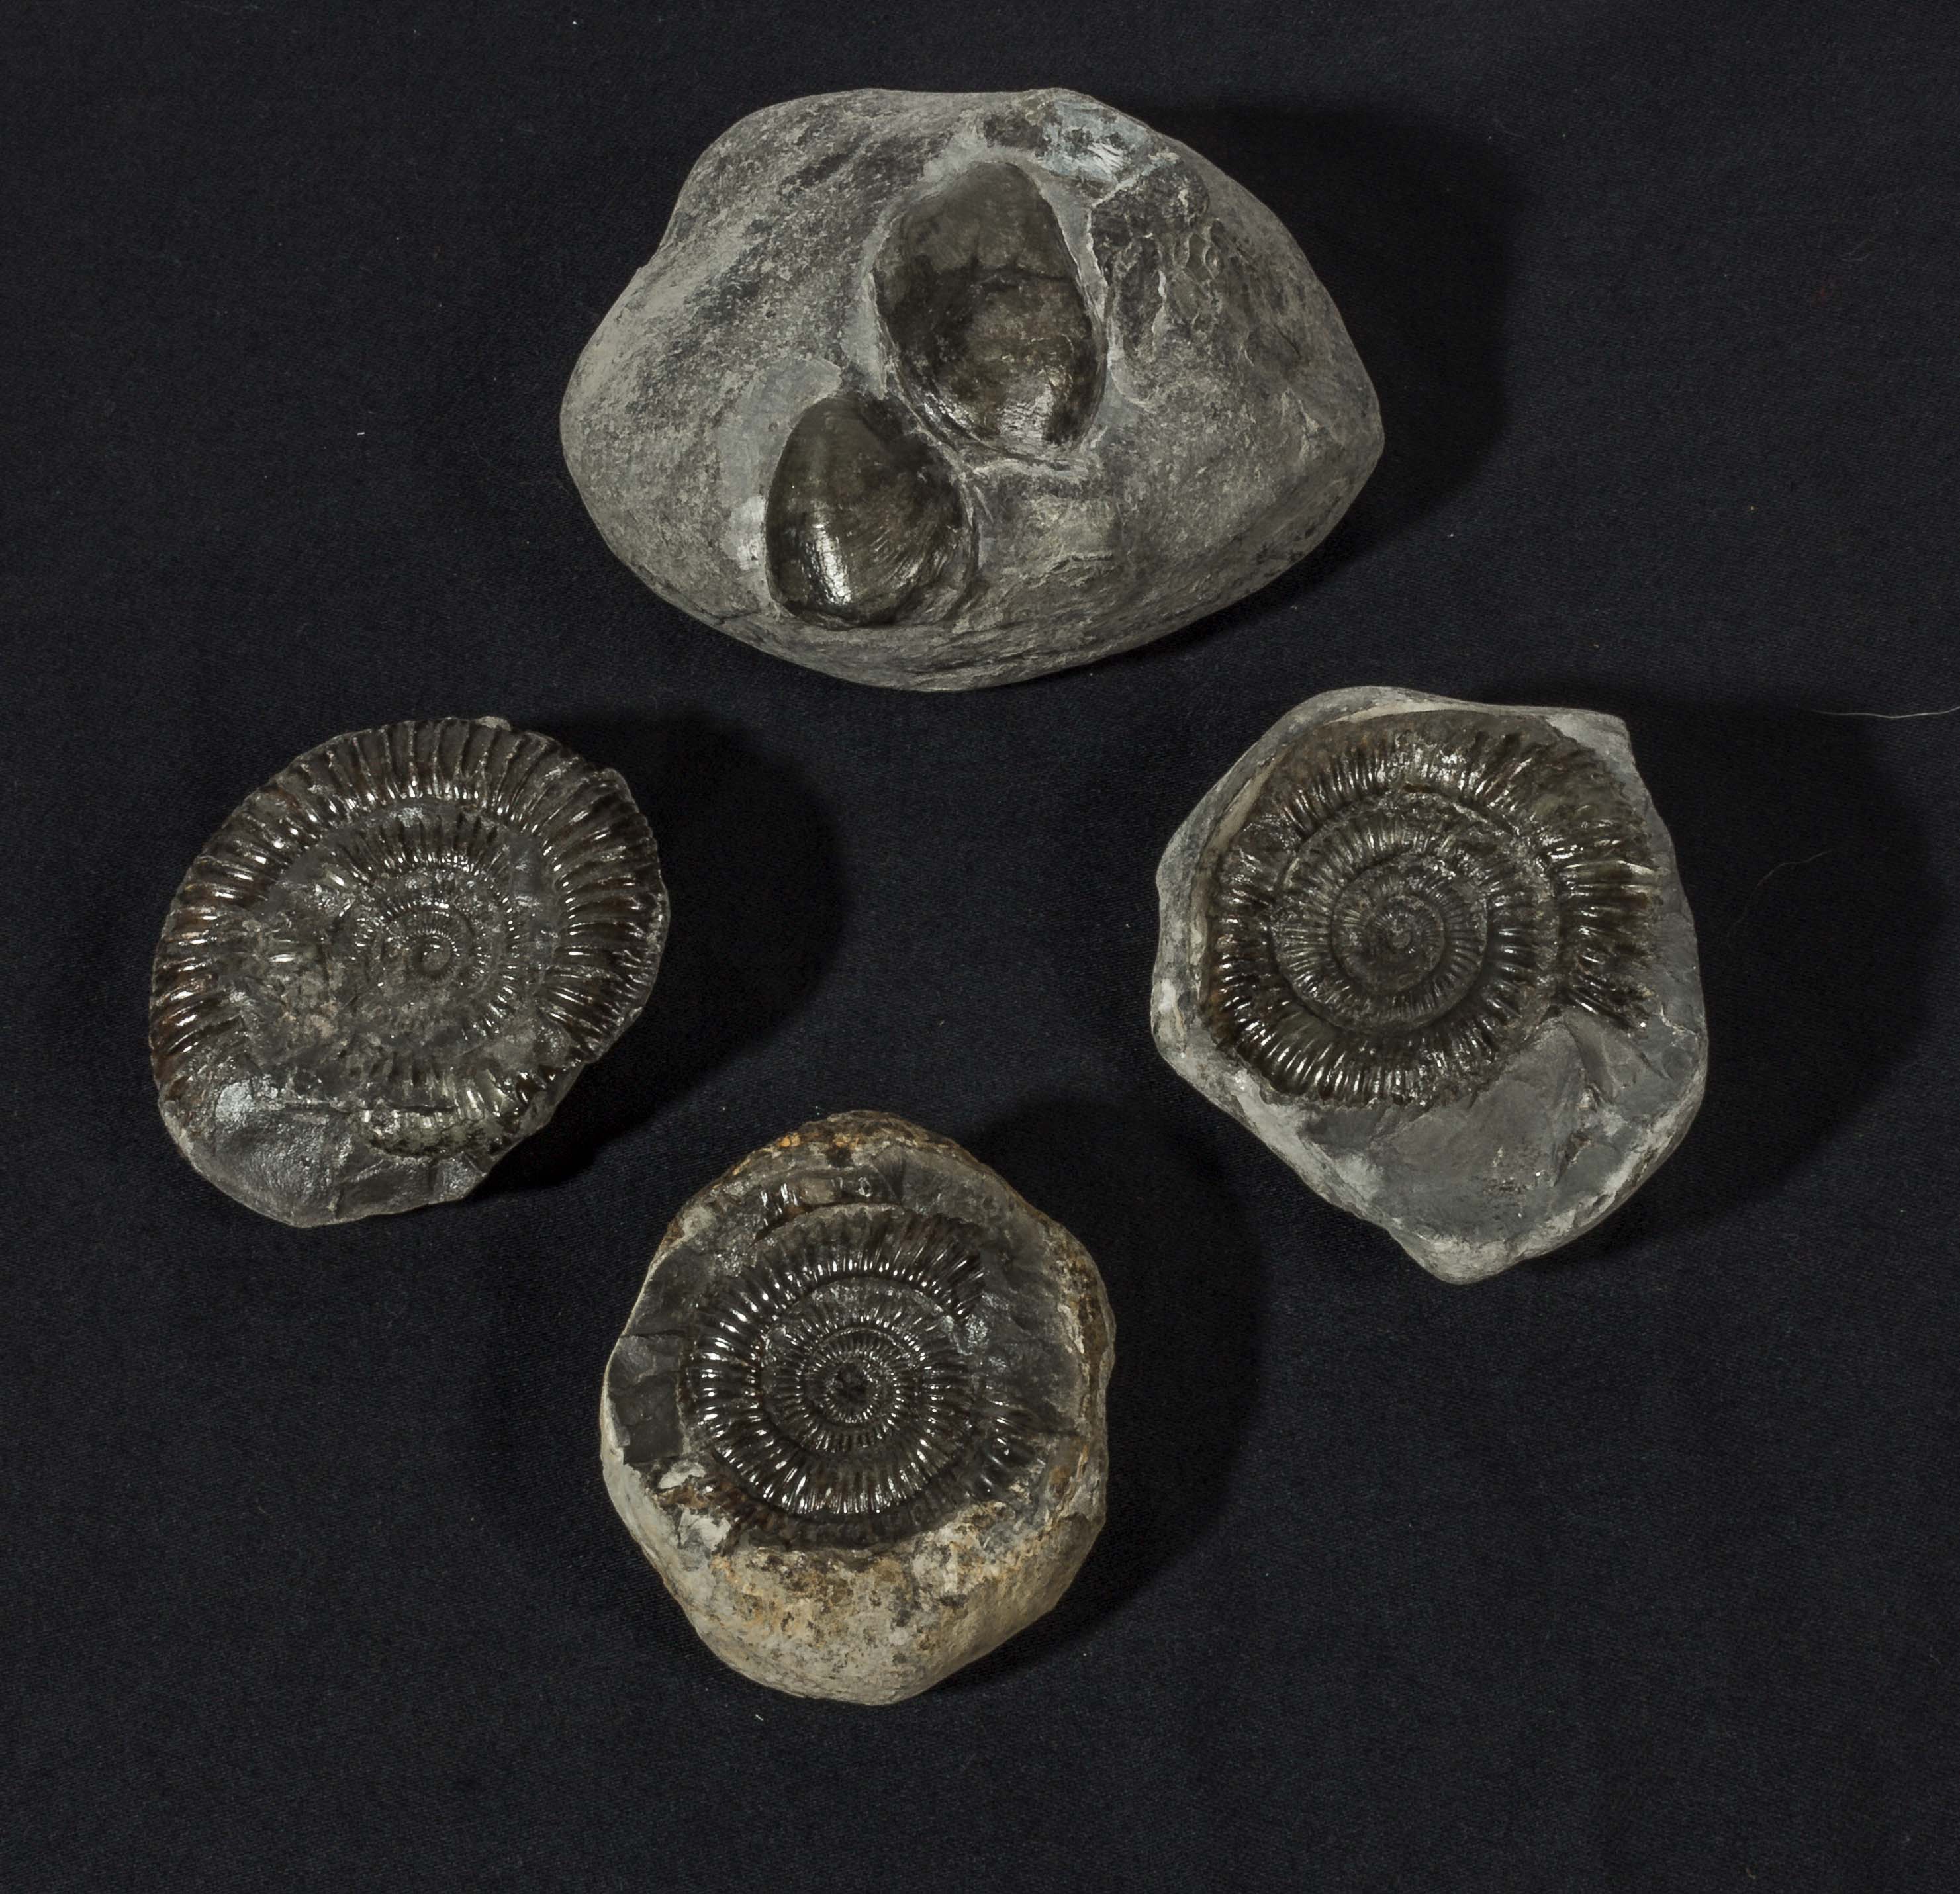 Four fossils